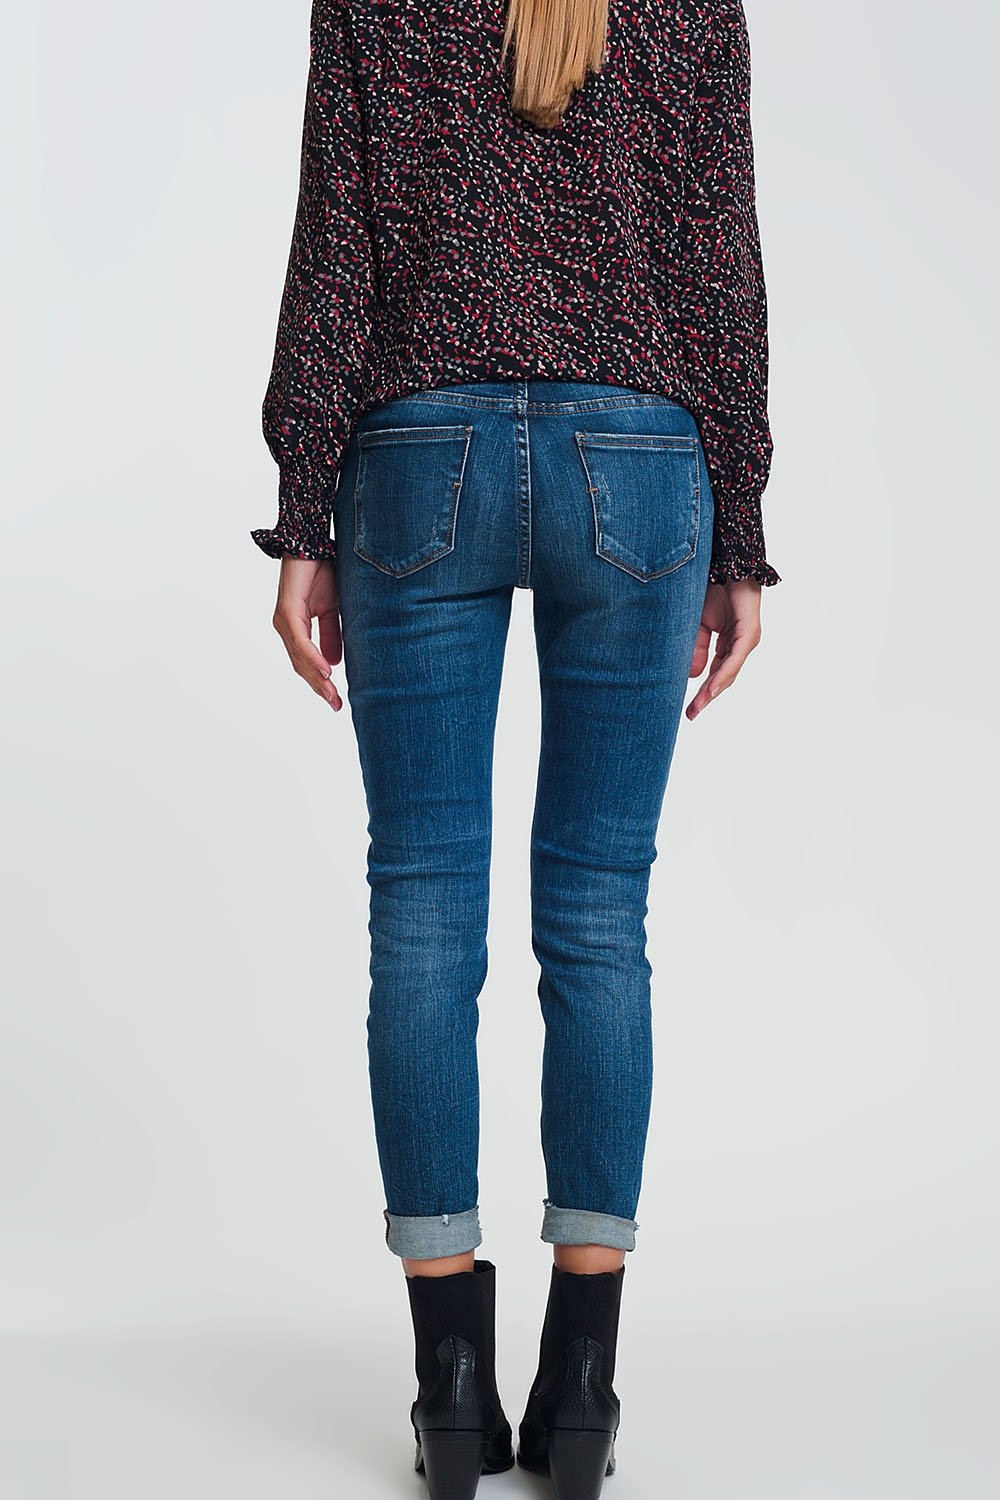 High Waisted Skinny Jeans in Dark Wash Blue With Ripped Details